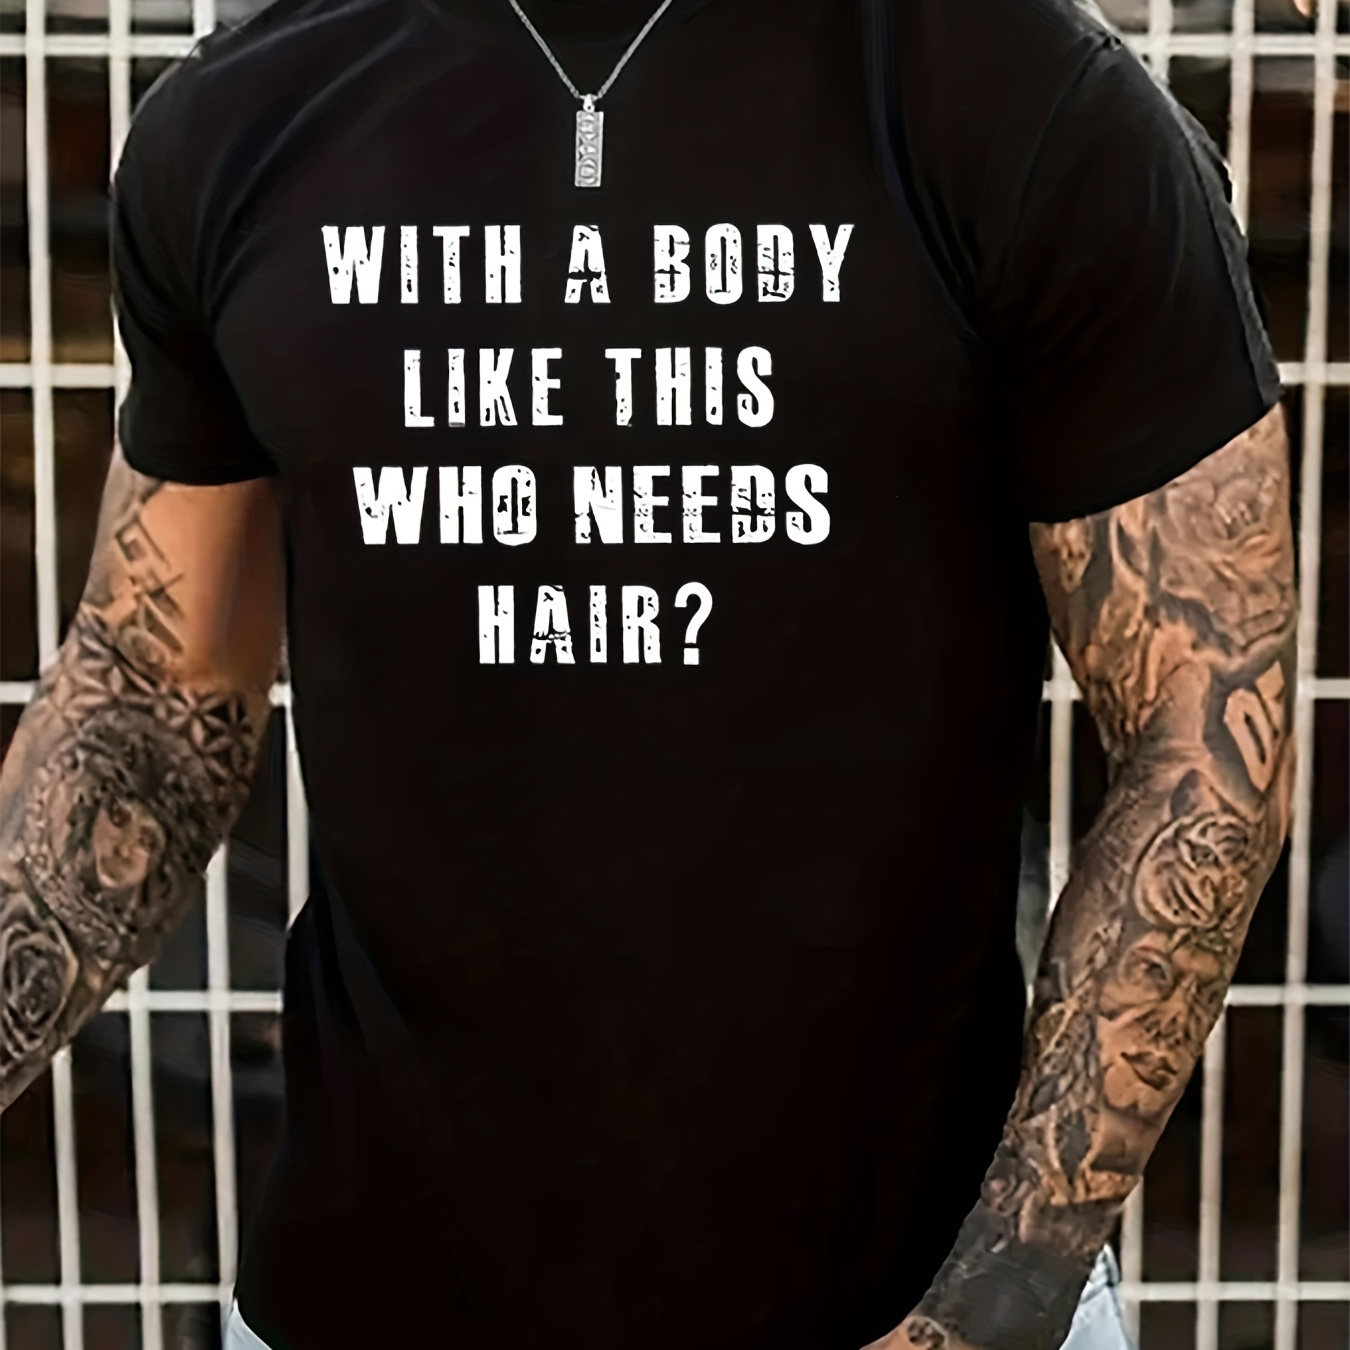 

With A Body Like This Who Need Hairs Print Men's Round Neck Short Sleeve Tee Fashion Regular Fit T-shirt Top For Spring Summer Holiday